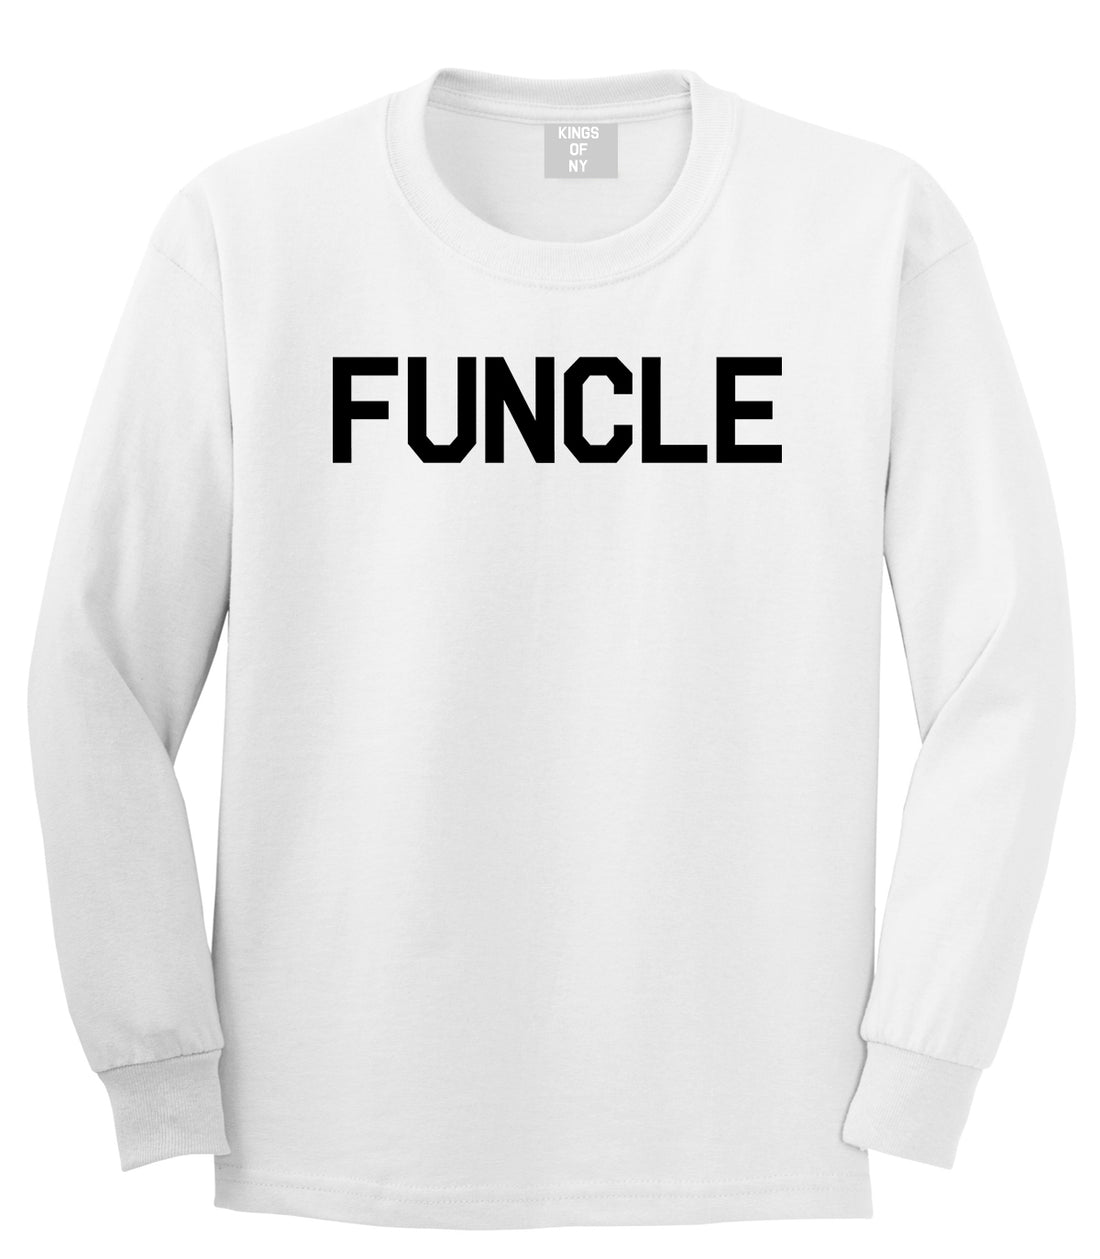 Funcle Fun Funny Uncle Mens Long Sleeve T-Shirt White